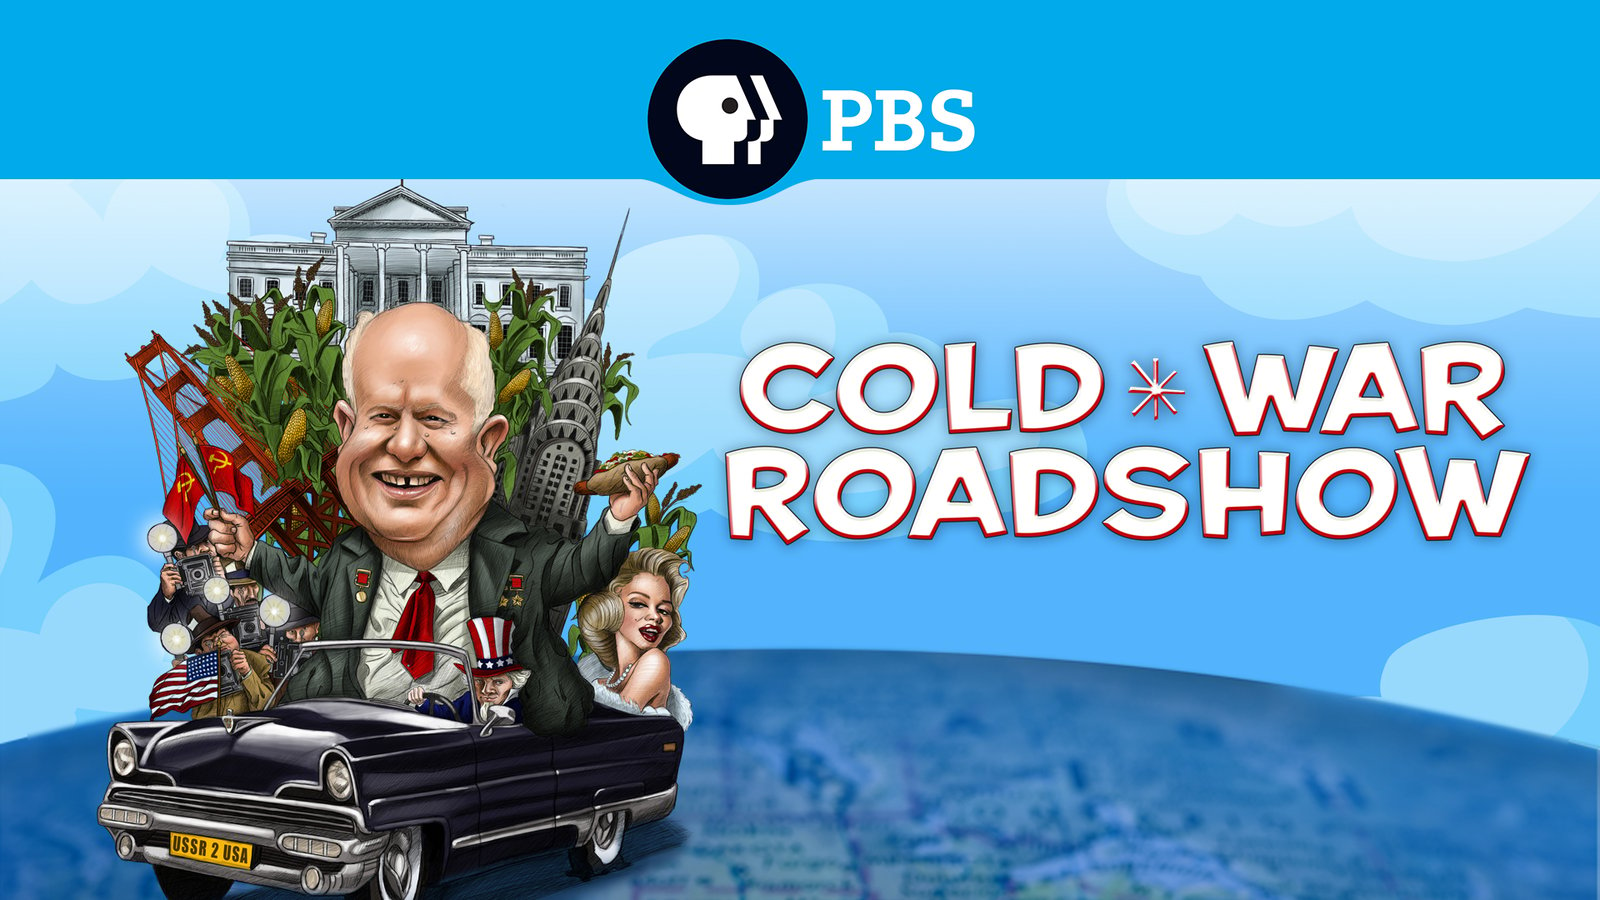 American Experience: Cold War Roadshow - The Reaction of the American Media to Nikita Khrushchev's 1959 Tour of the U.S.